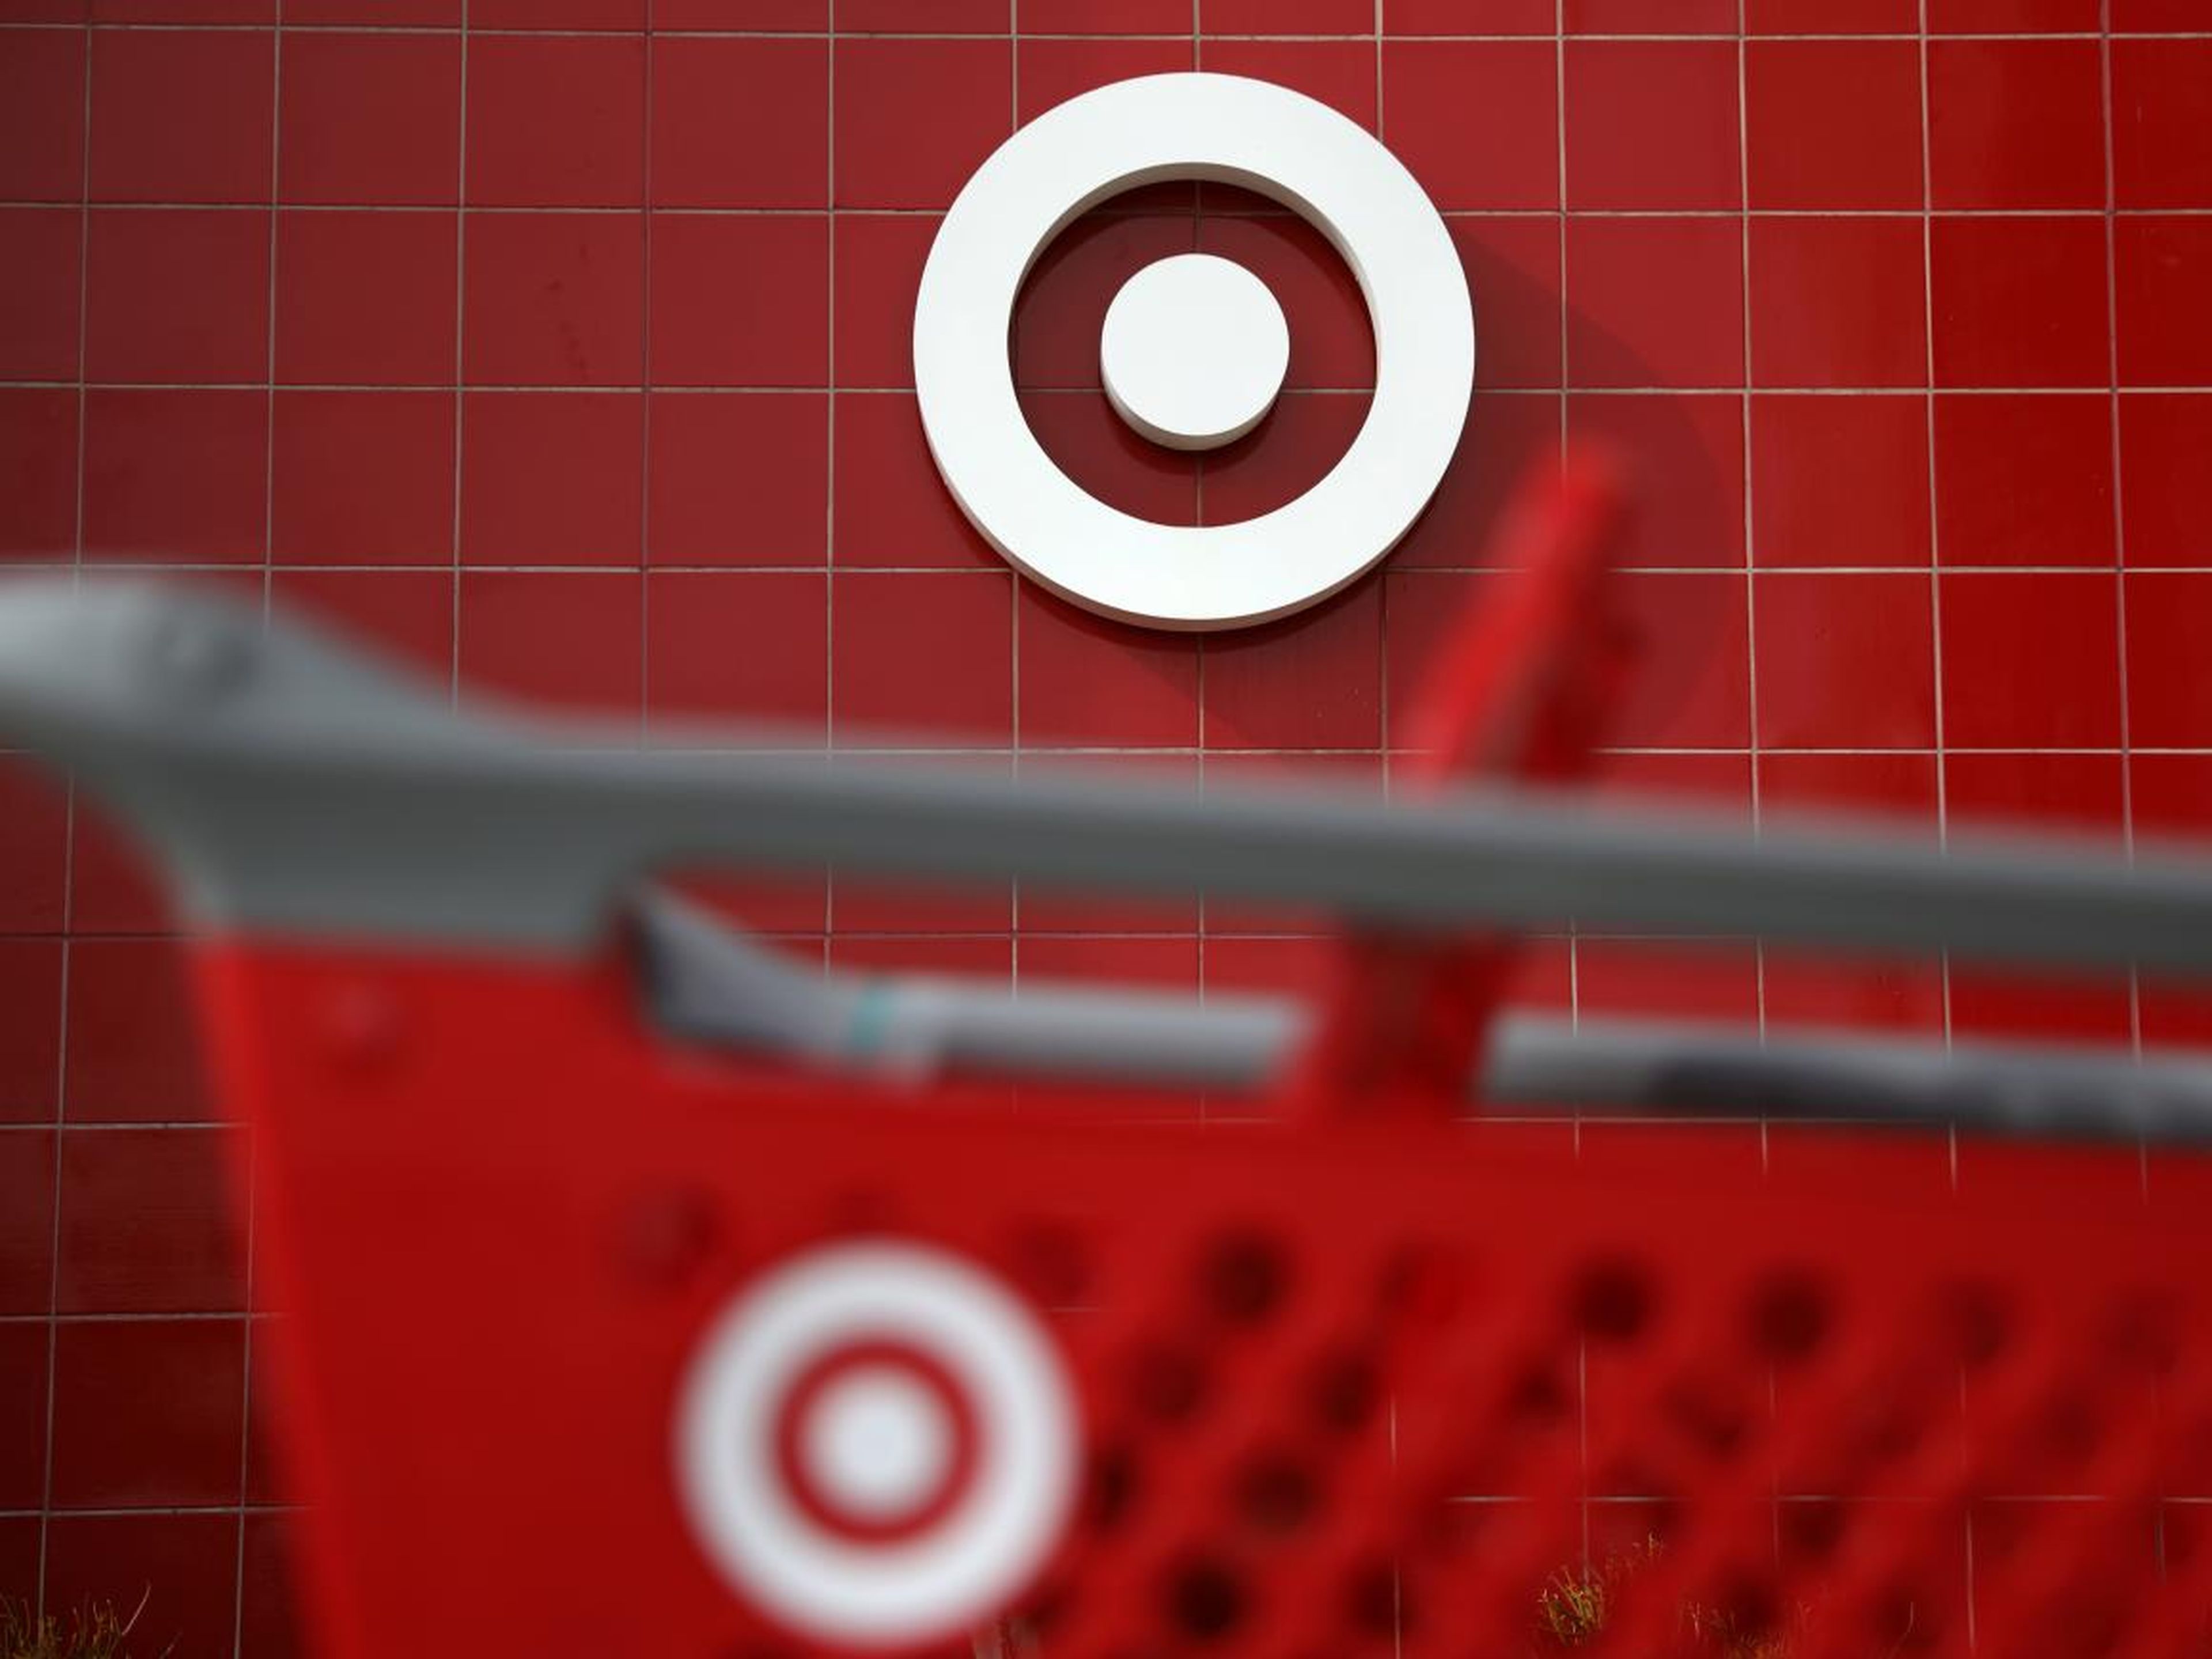 10. Target was subject to a data breach in 2013 that exposed 40 million credit and debit card accounts.